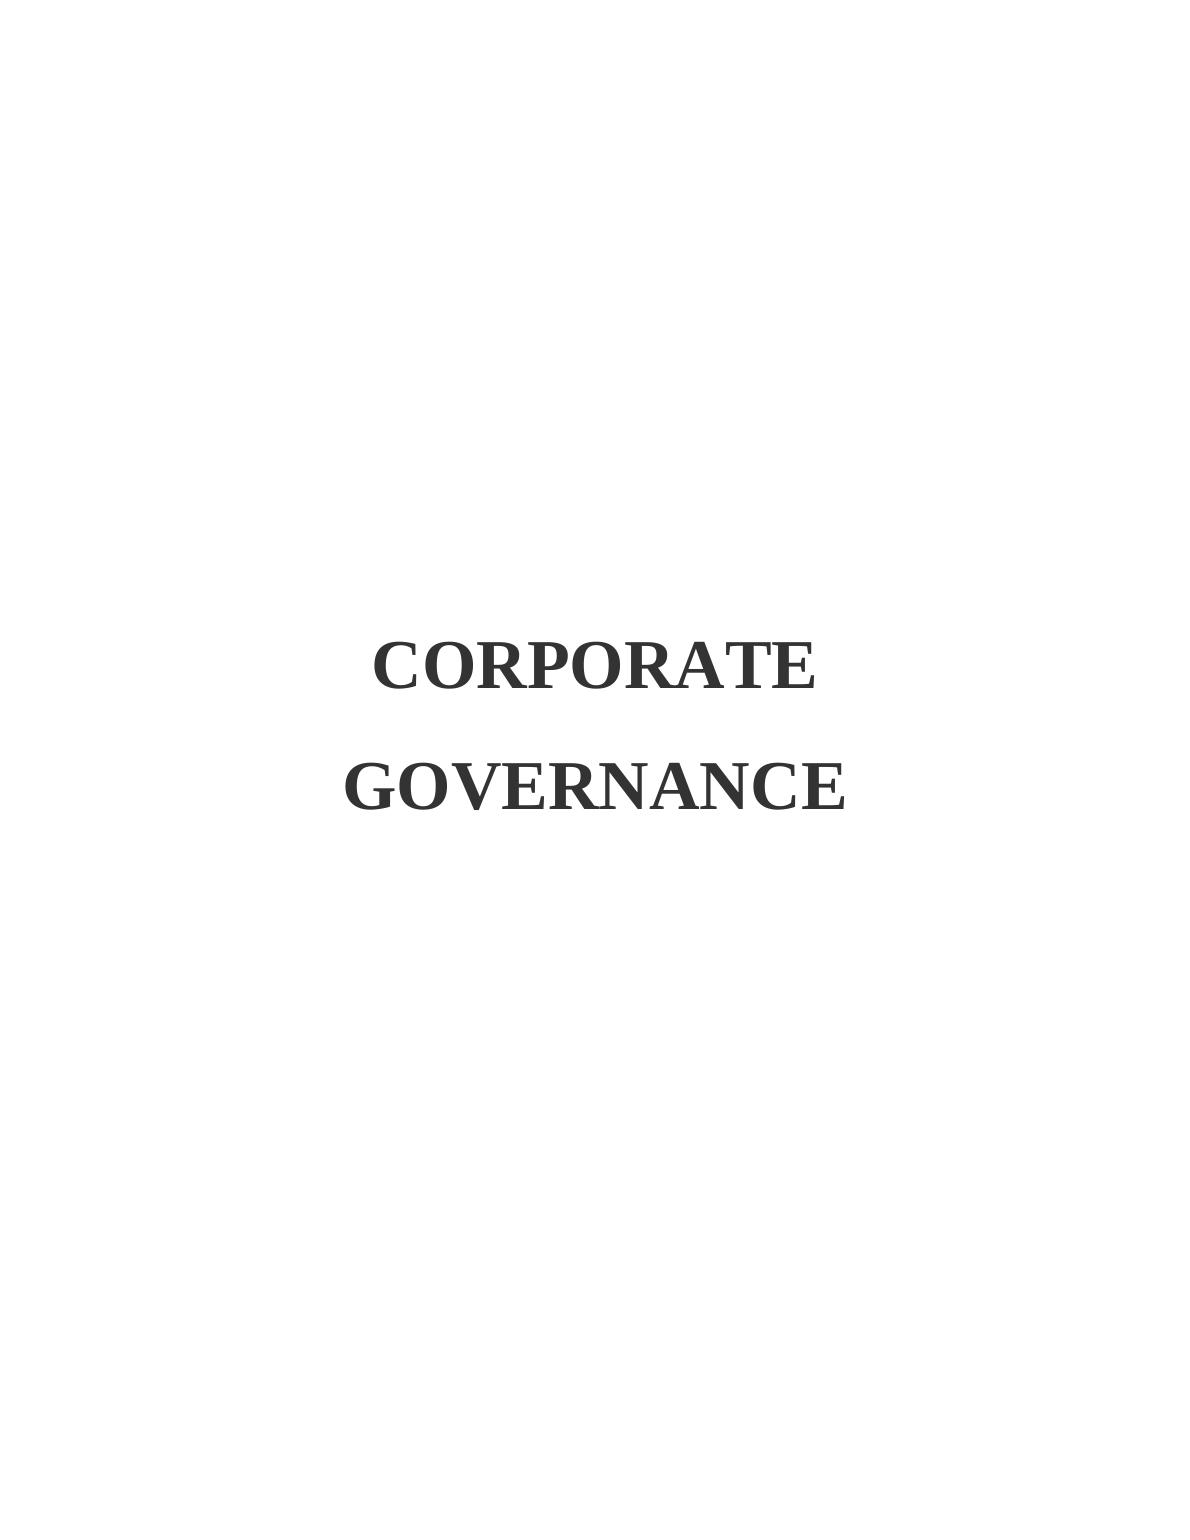 Corporate Governance TABLE OF CONTENTS INTRODUCTION_1